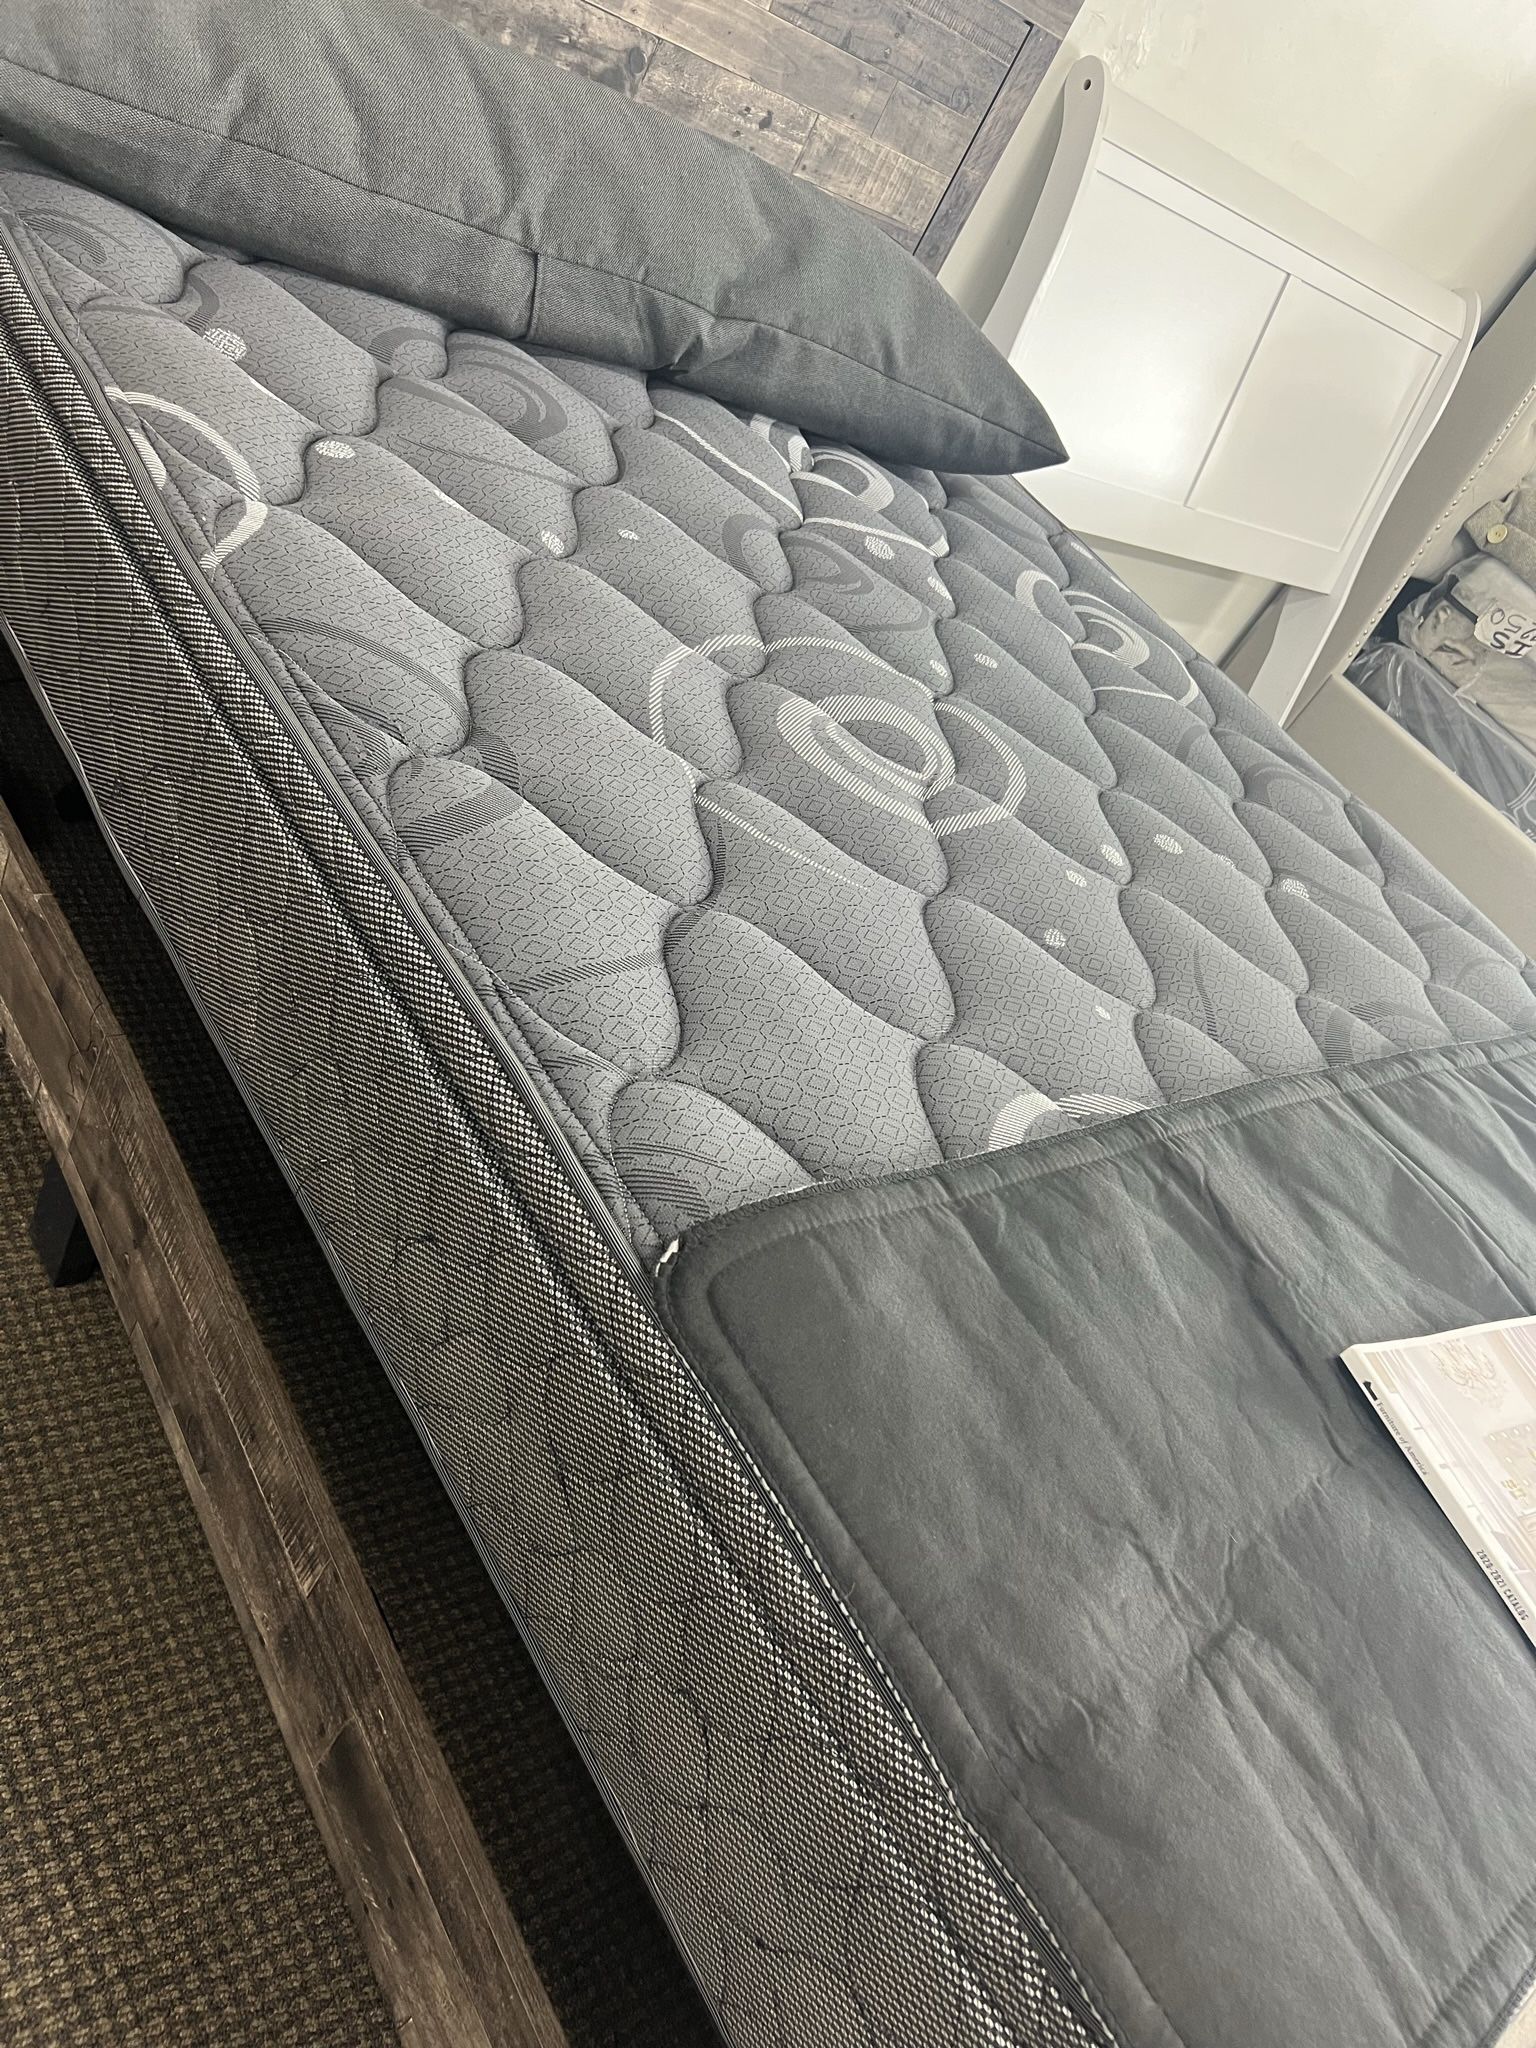 NEW!! Comfy Bargain Beds Twin Full Queen King Cal King Mattress STILL IN PLASTIC!! 🚛 Avail